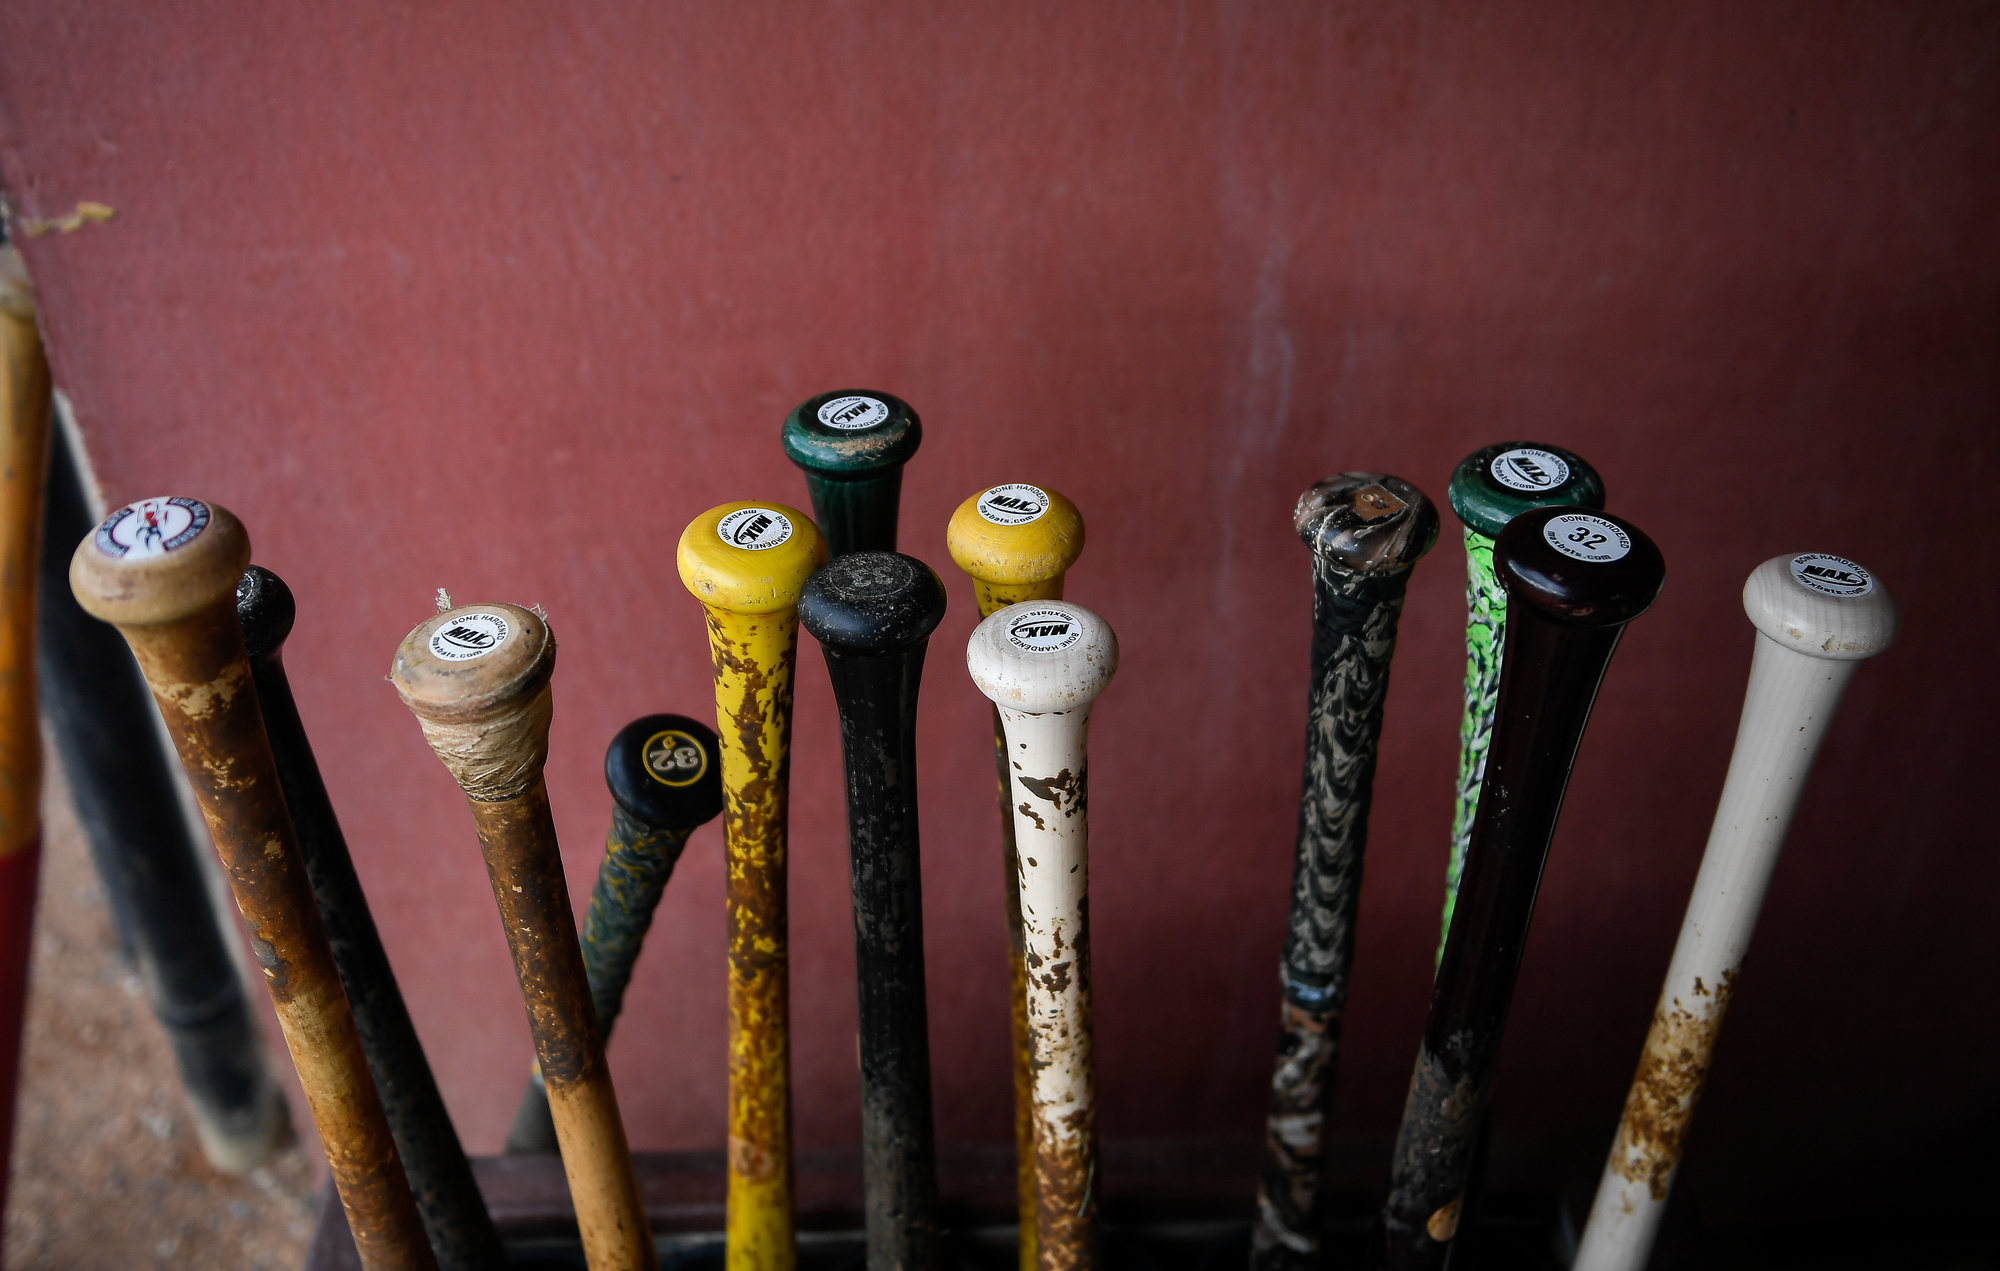 Stearns County League players use wood bats, and area youths players are taught to do the same.